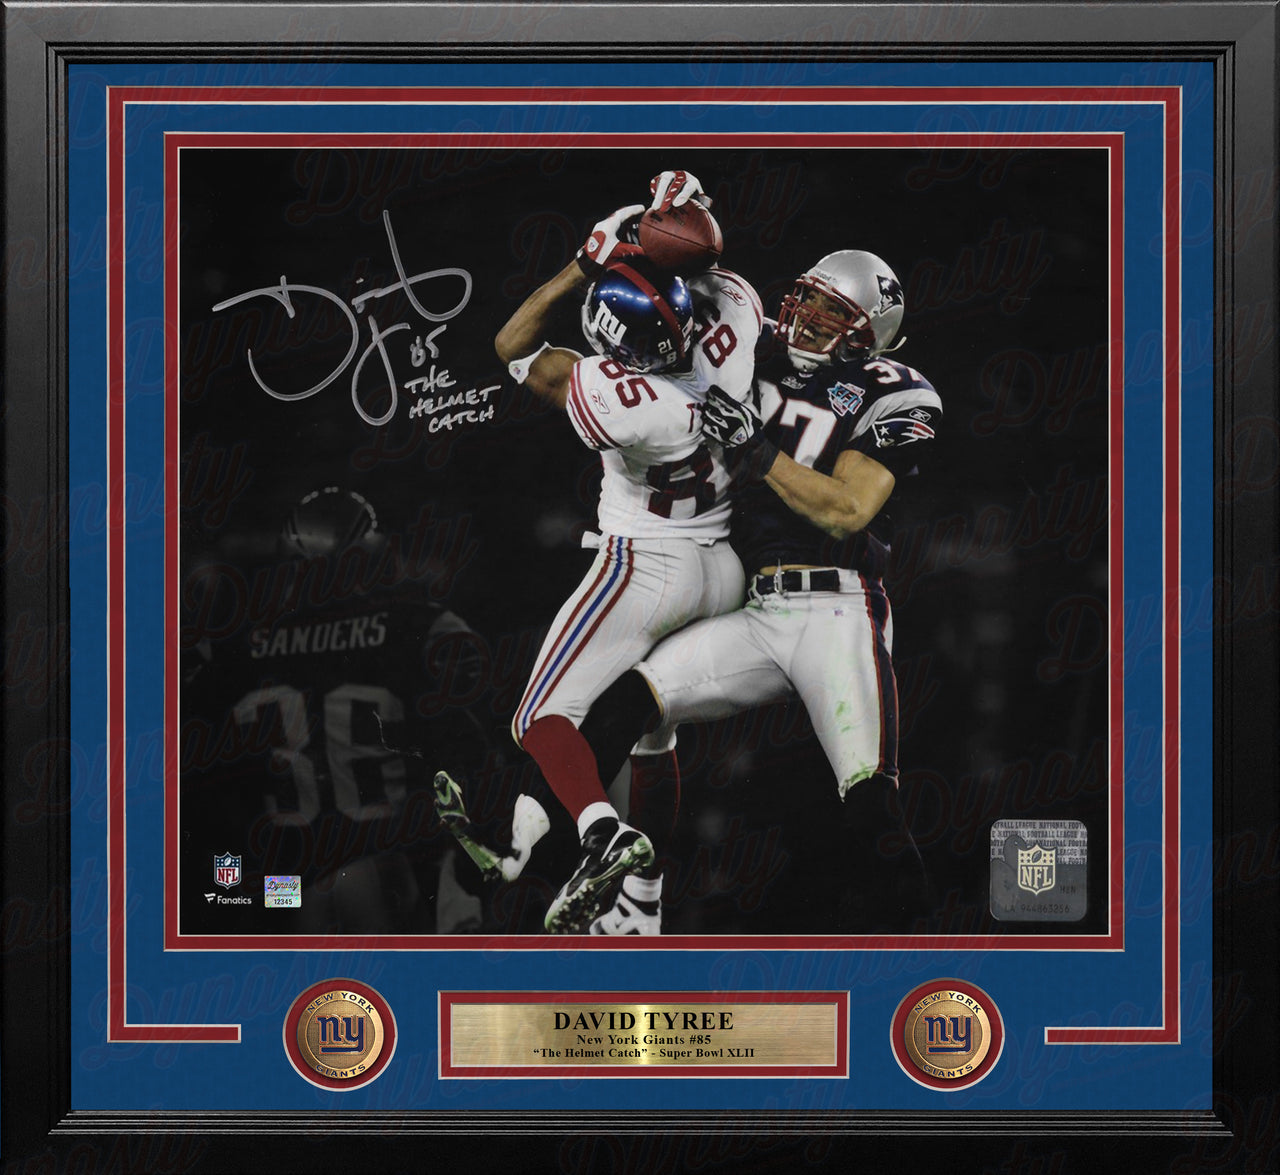 David Tyree Super Bowl Catch NY Giants Autographed 16x20 Framed Photo Inscribed The Helmet Catch